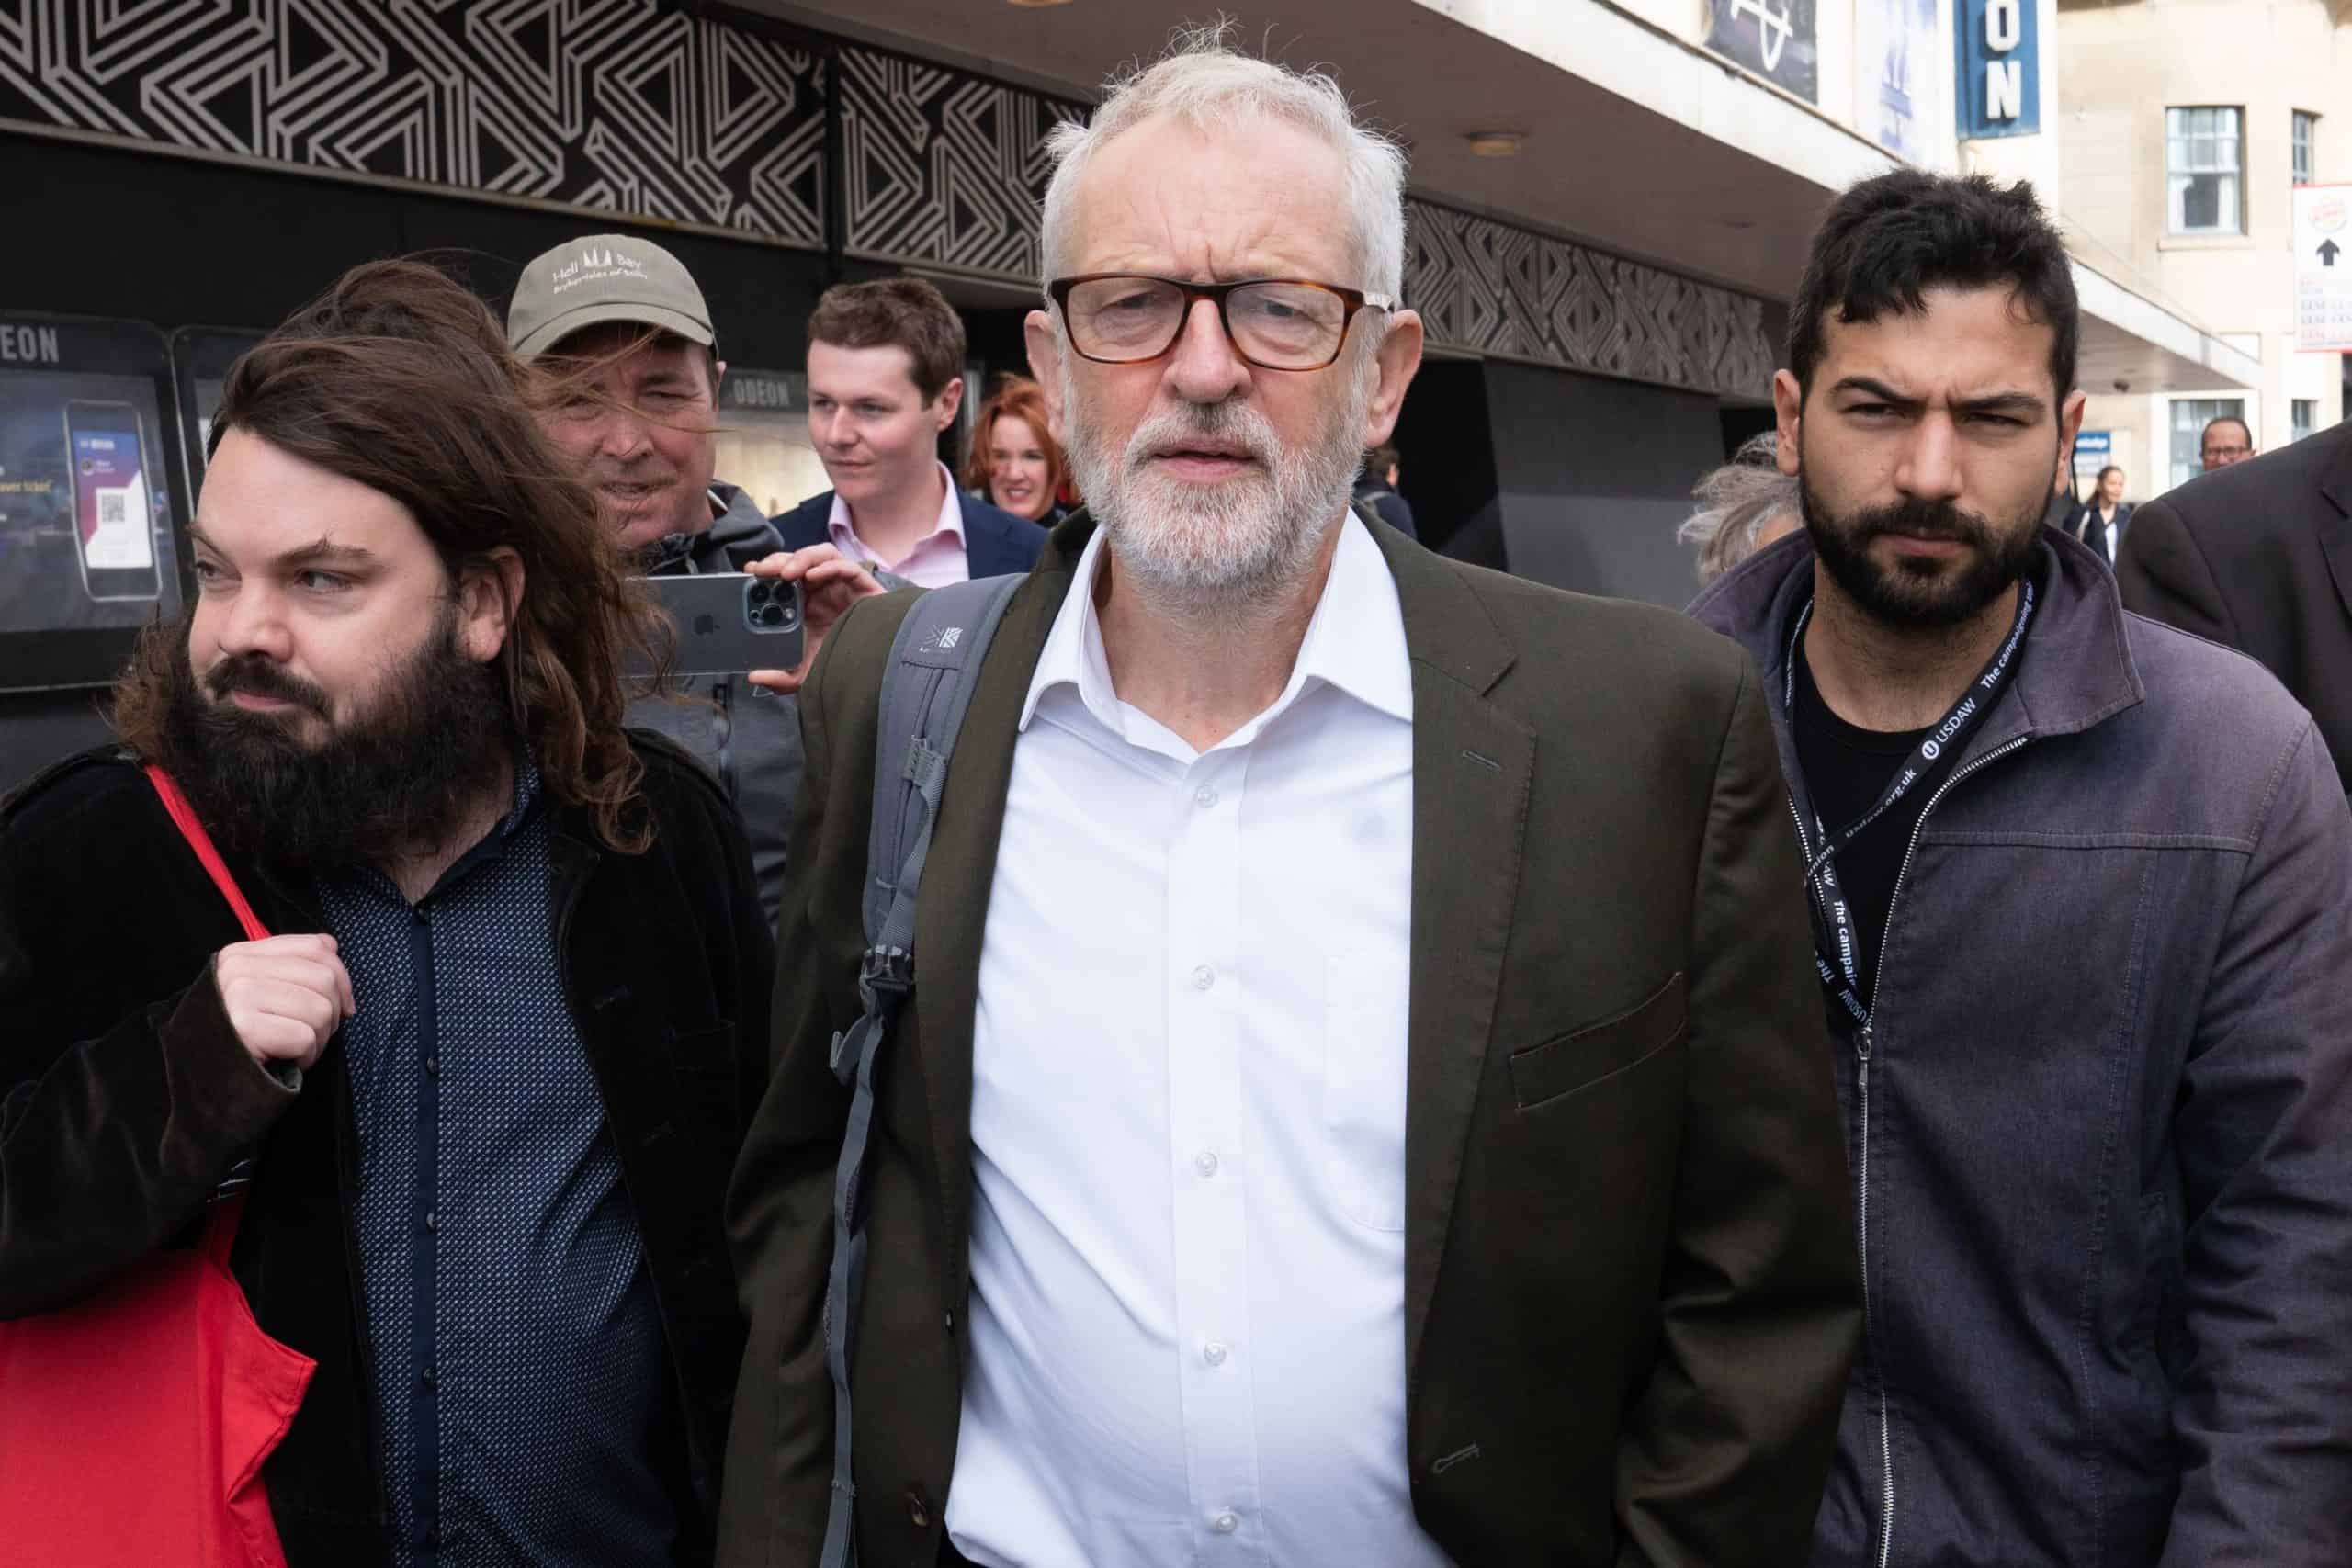 Labour line up candidate to take on Corbyn in Islington North